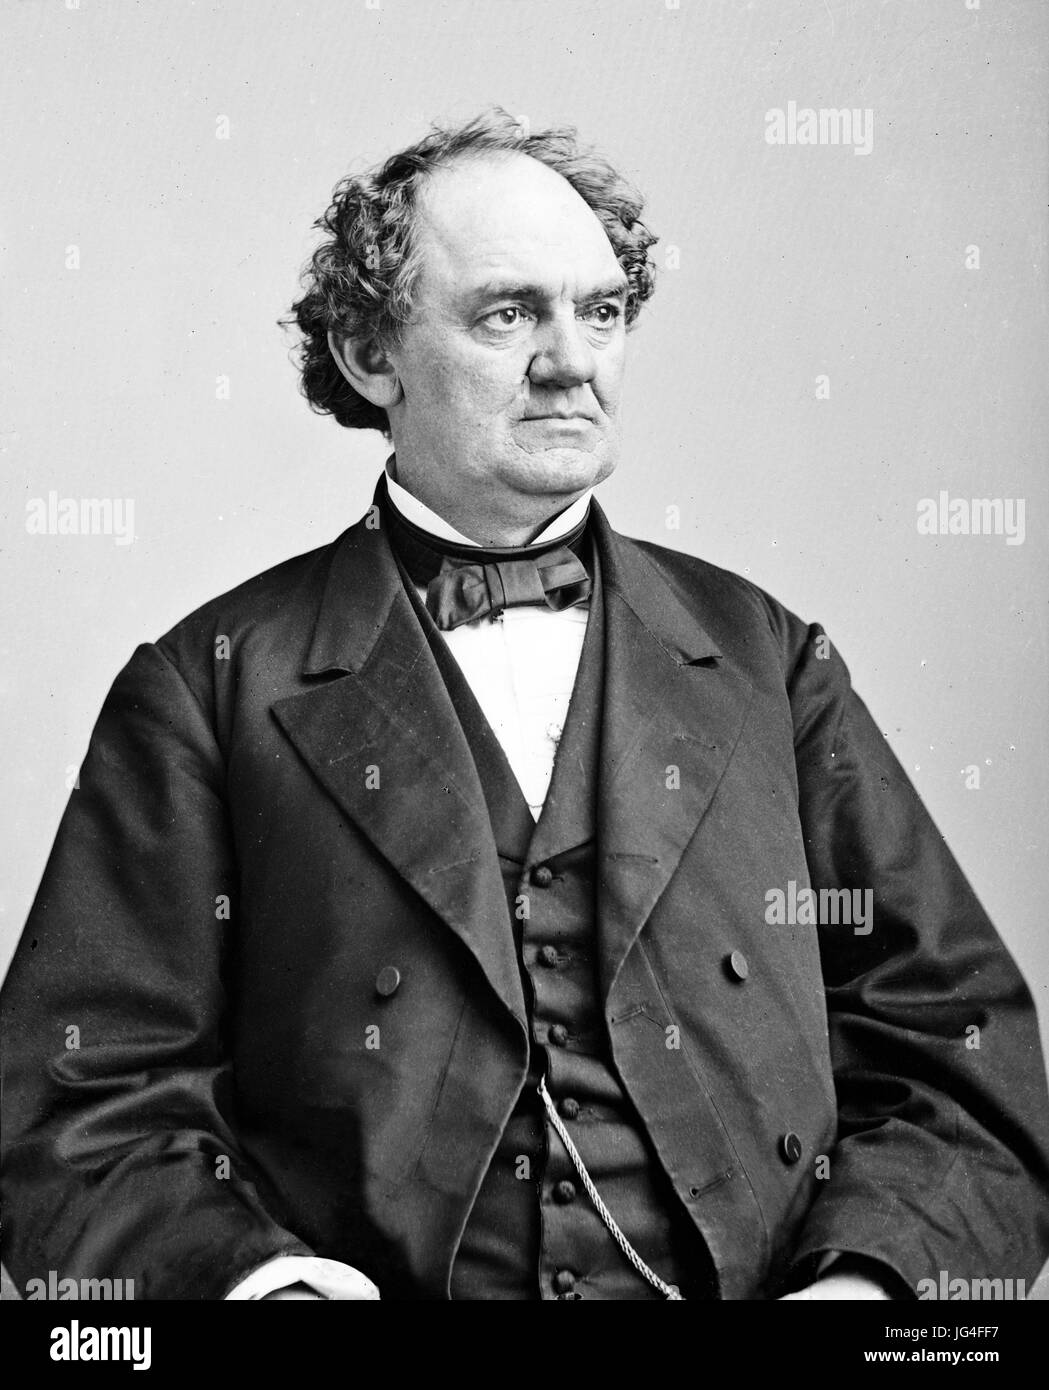 P.T. BARNUM (1810-1891) American showman about 1850 Stock Photo